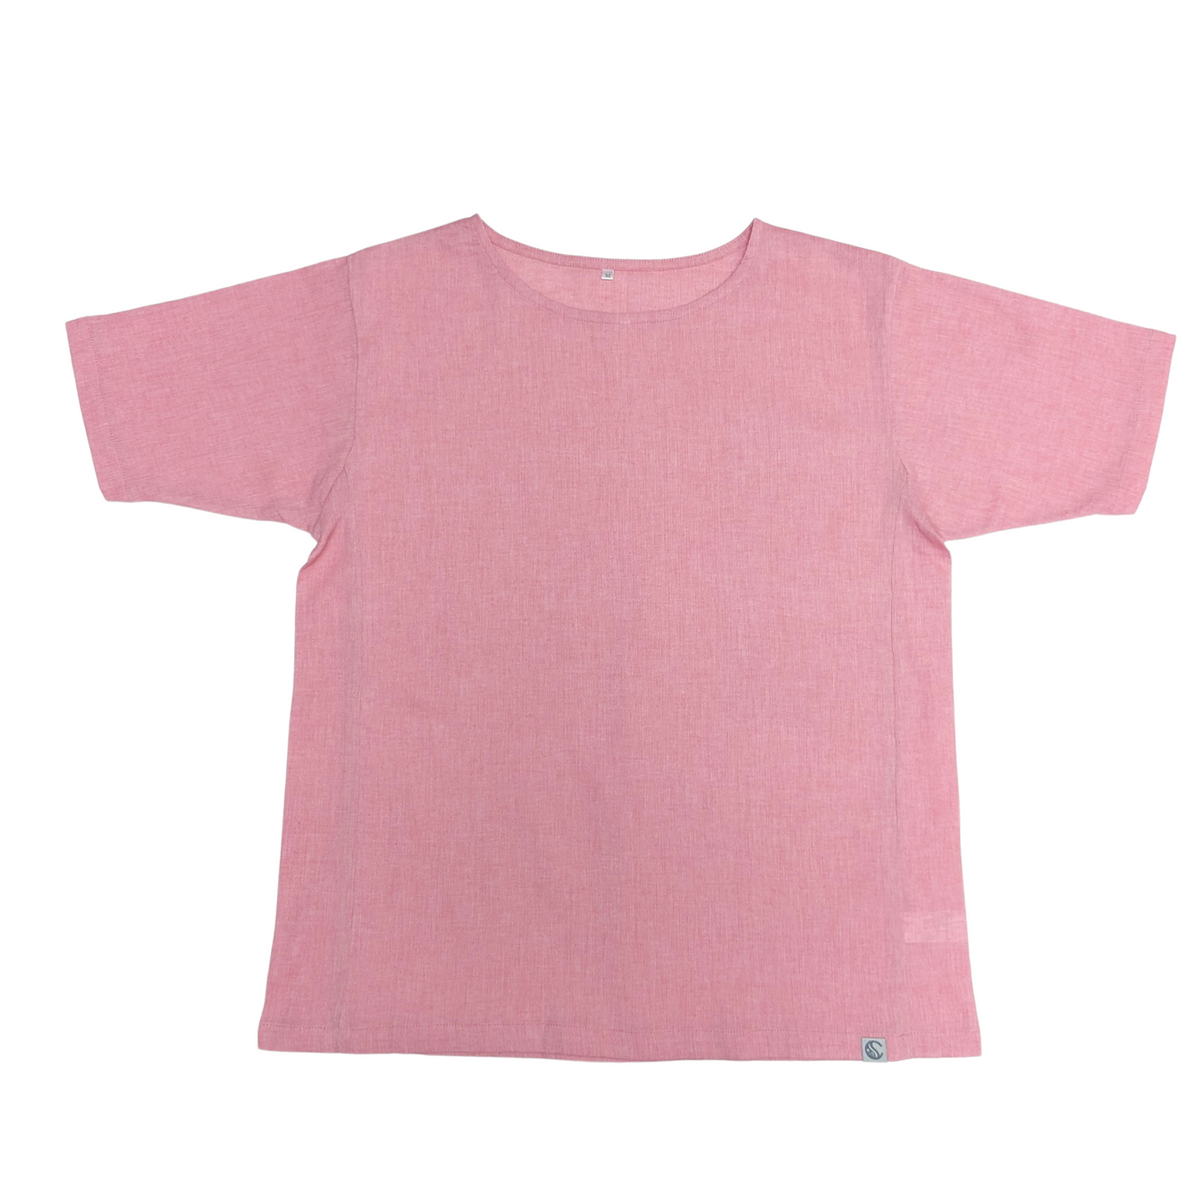 Cool, Stretchy, Comfy Lounge T-Shirt | Unisex | Solid Color | Pink, Navy, Gray - CHERRYSTONEstyle